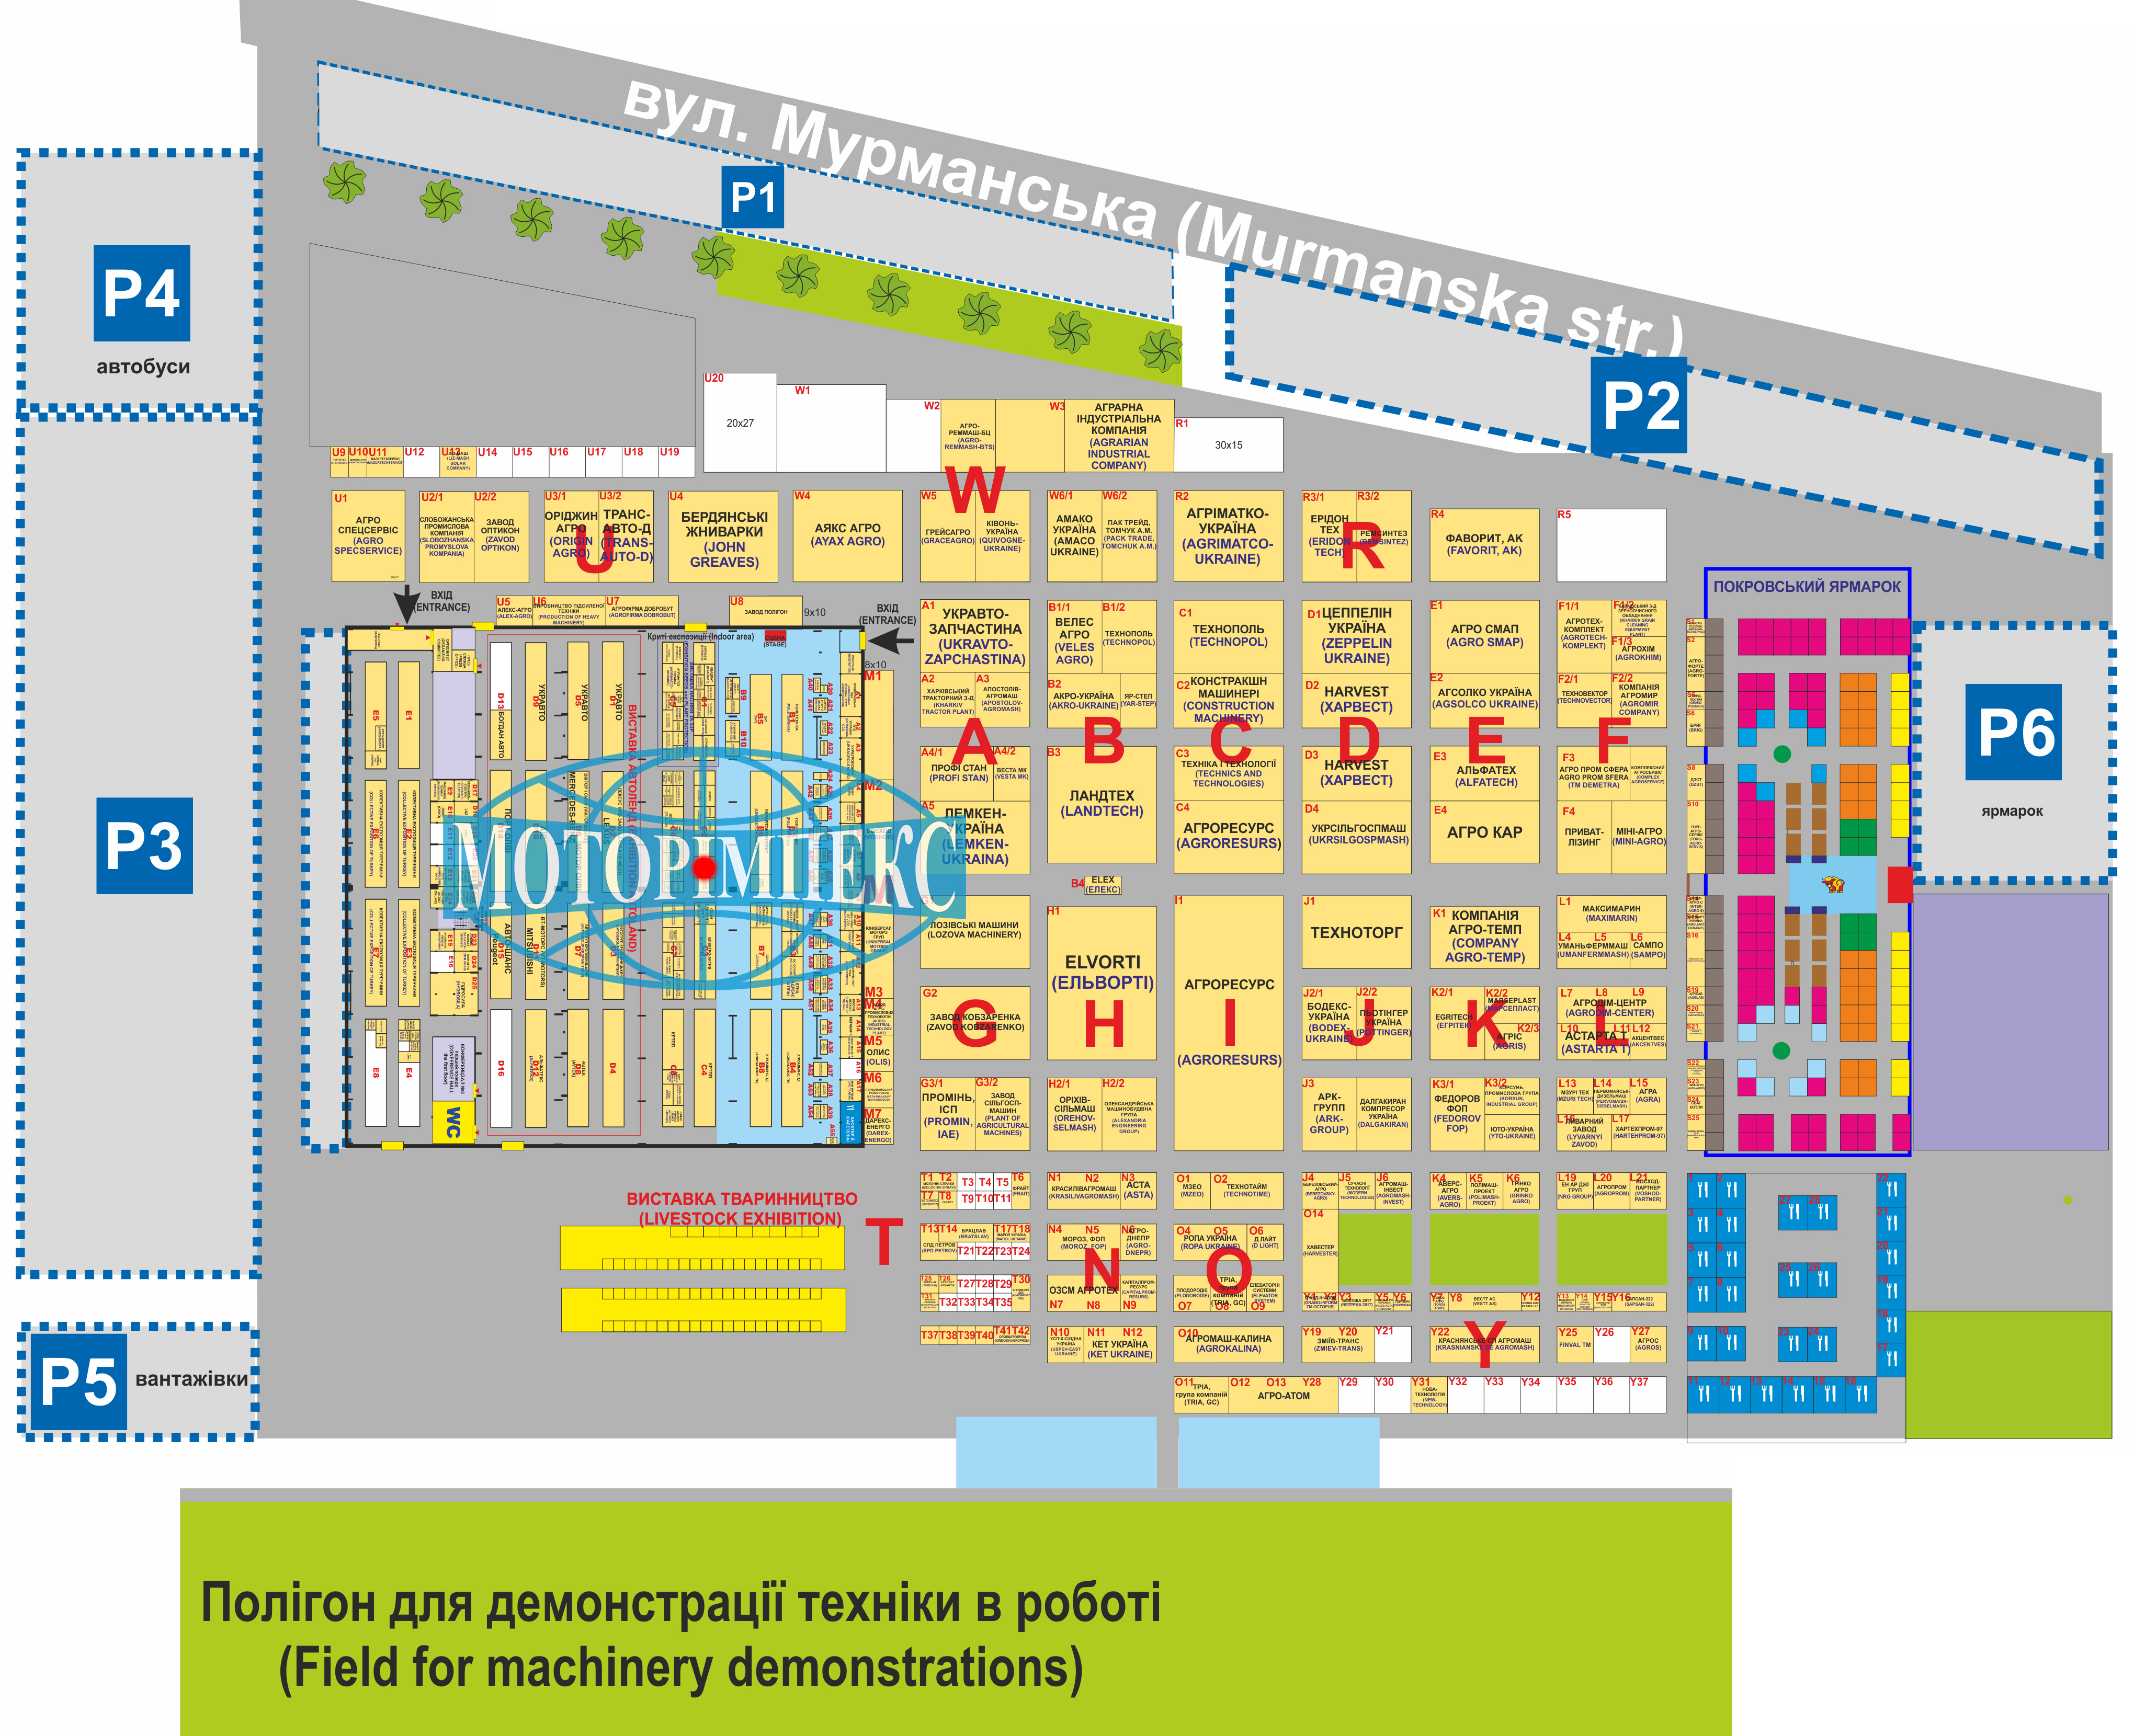 The layout of the stand of the Motorimpex group of companies at the AgroExpo-2019 exhibition